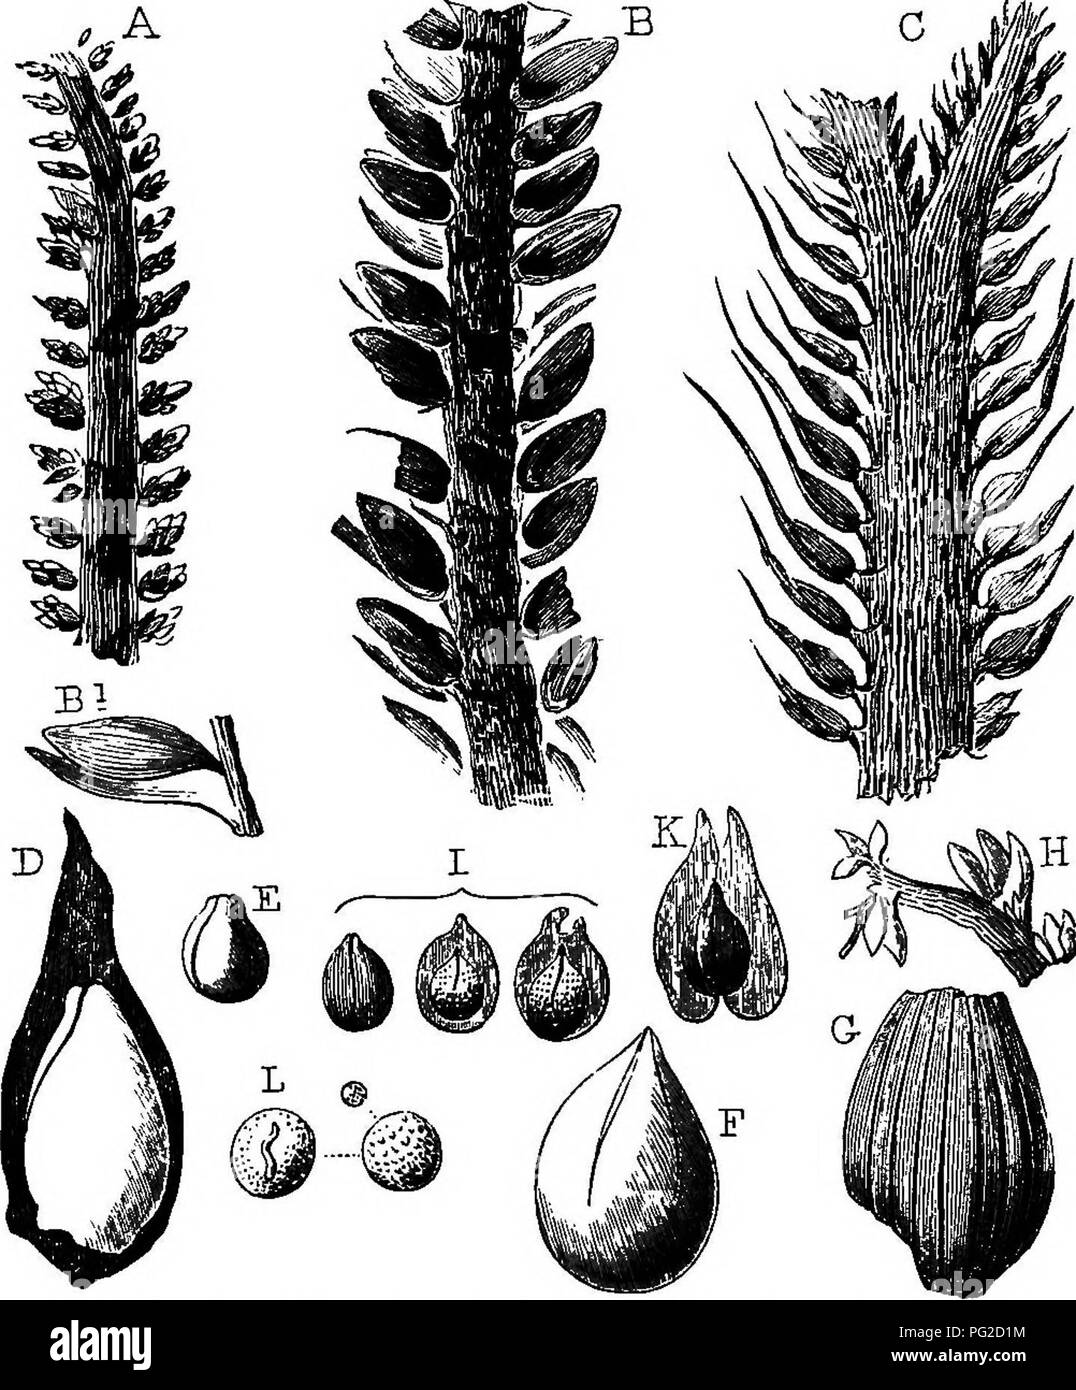 . The geological history of plants. Paleobotany; 1888. 132 THE GEOLOGICAL HISTORY OF PLANTS. On the stems so constructed were placed long and often broad many-nerved leaves, with rows of stomata or breathing-pores, and attached by somewhat broad bases to the stem and branches. The fruit consisted of racemes, or clusters of nutlets, which seem to have been provided. Fig. 59.—Fruits of Cordaites and Taxine Conifers (coal-formation. Nova Scotia.J A, Antholithes squamosus (two thirds), b, A. rhabdoearpi (two tnirds). b', Carpel restored, o, A. spinosus (natural size). D, Trigonocarpum intermedium, Stock Photo